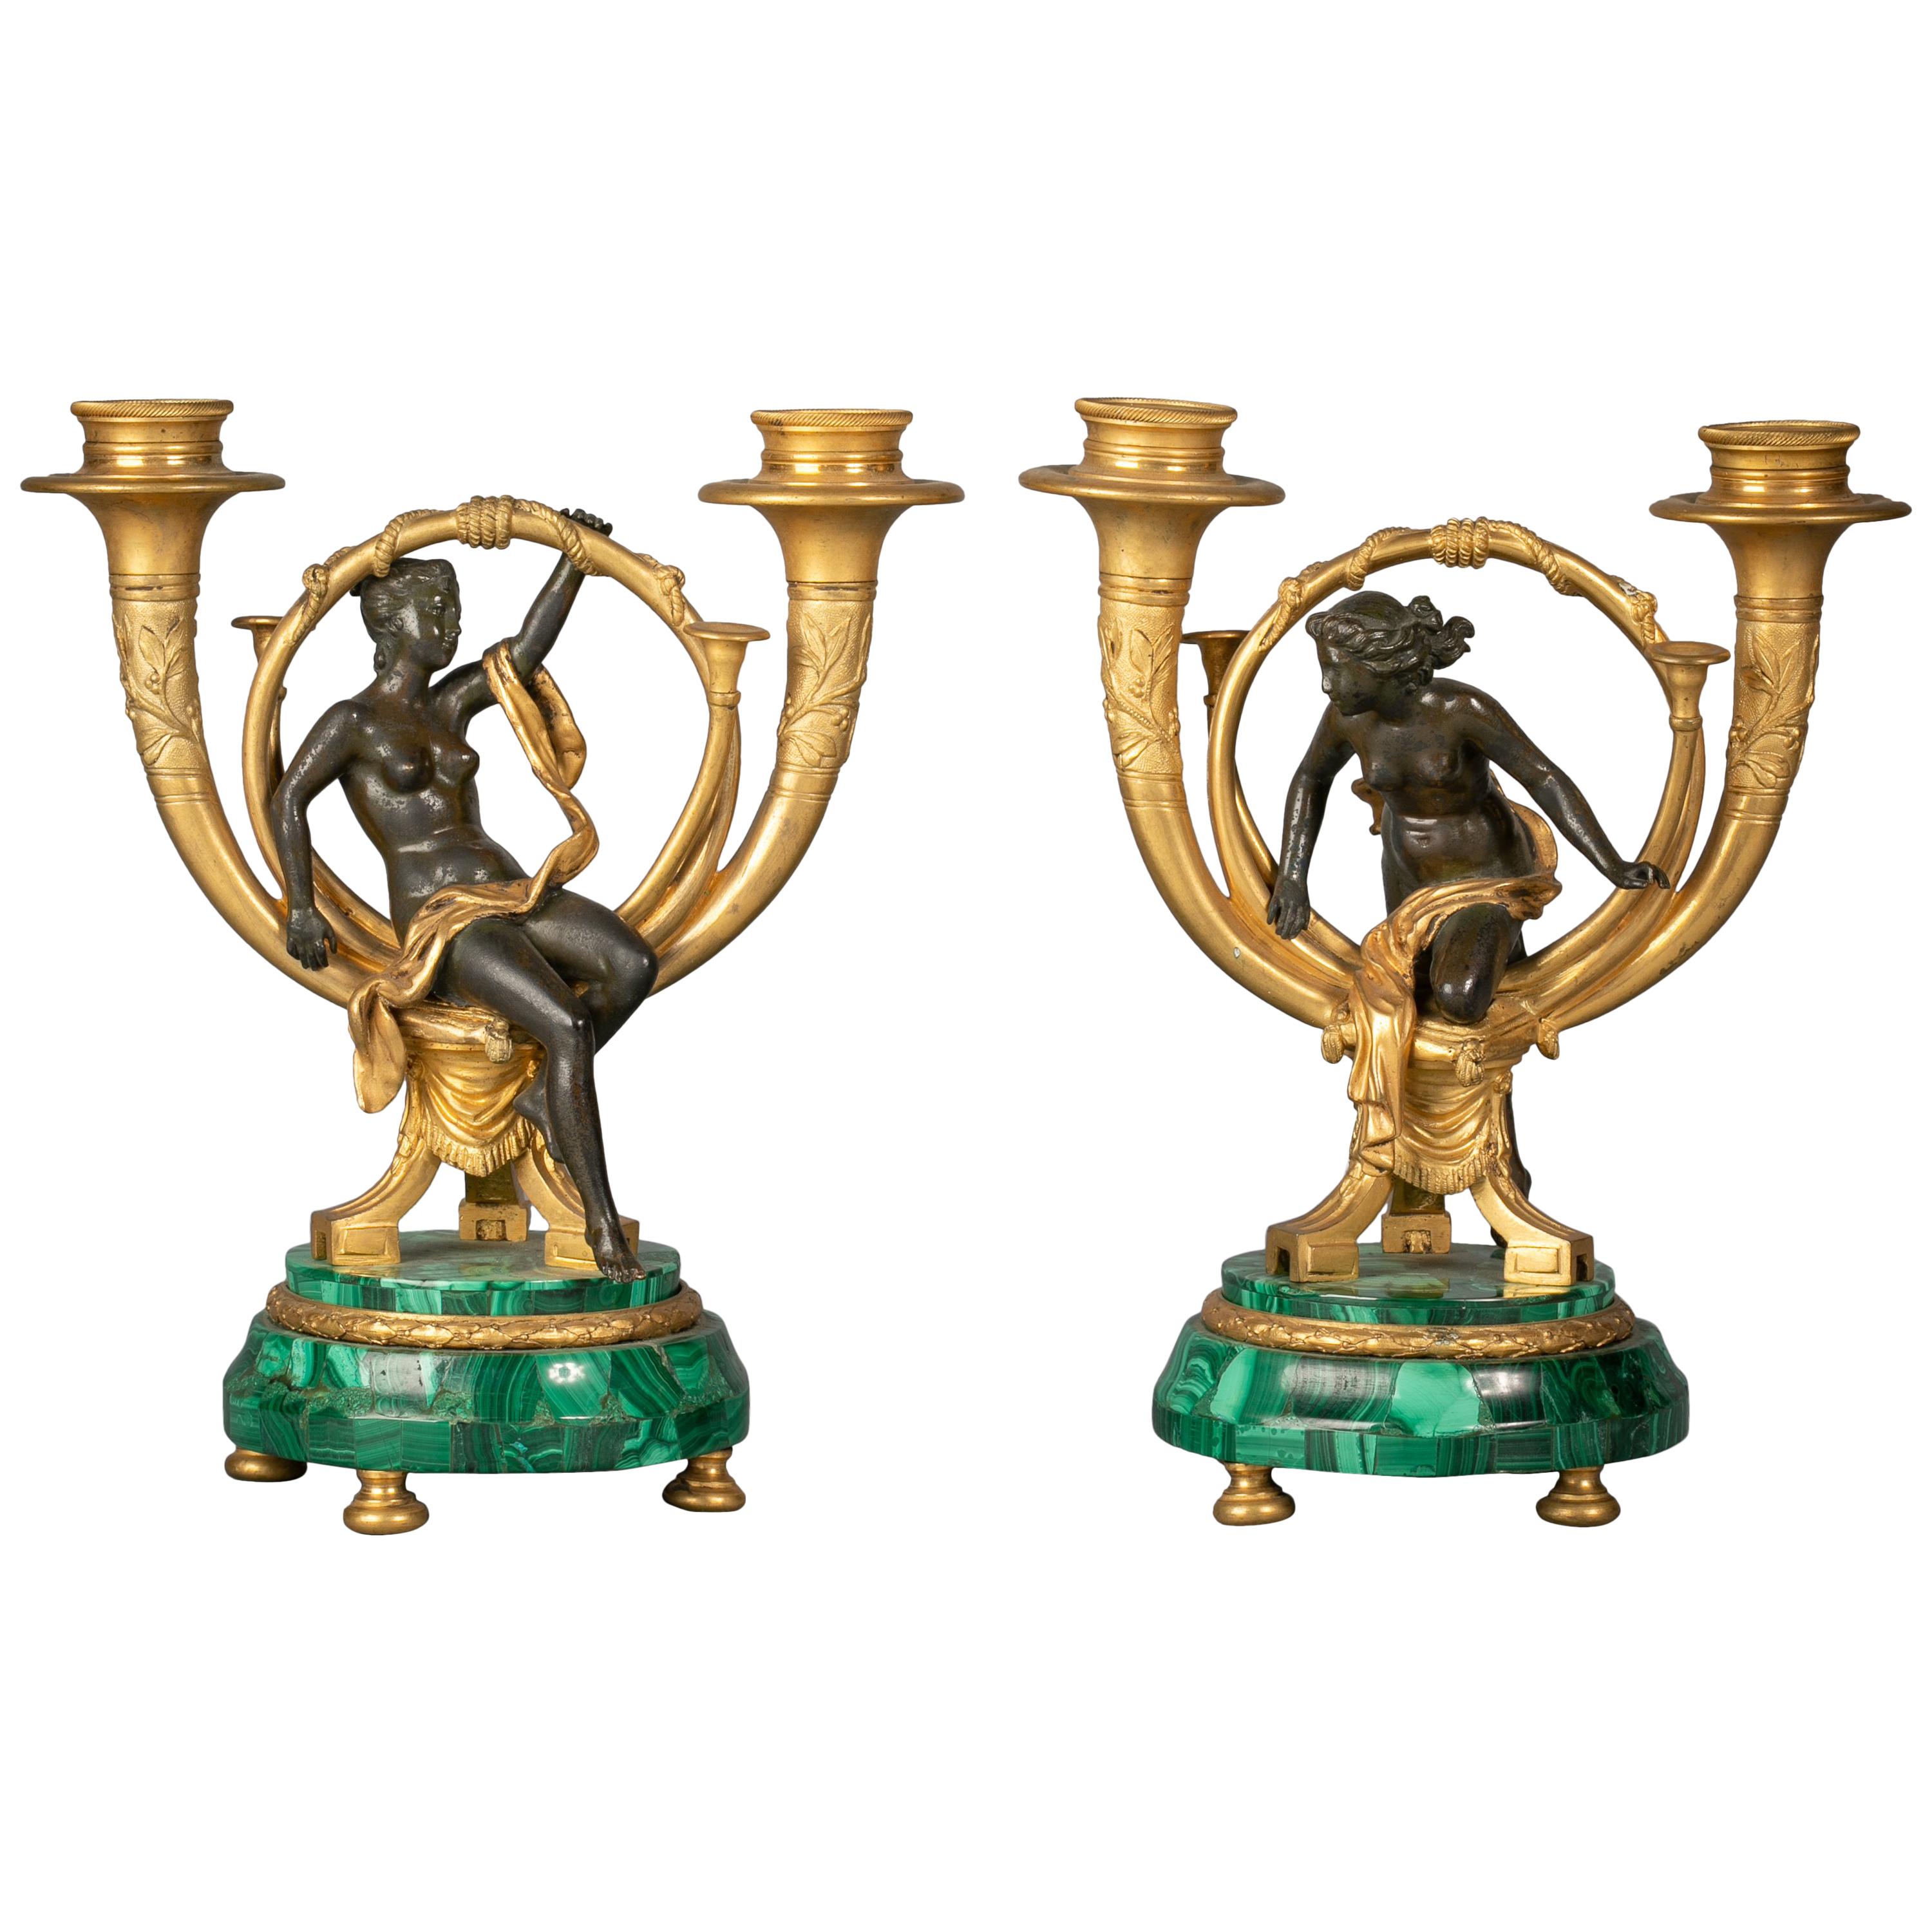 Pair of Unusual Gilt Bronze and Malachite Two-Light Candelabra, circa 1860 For Sale